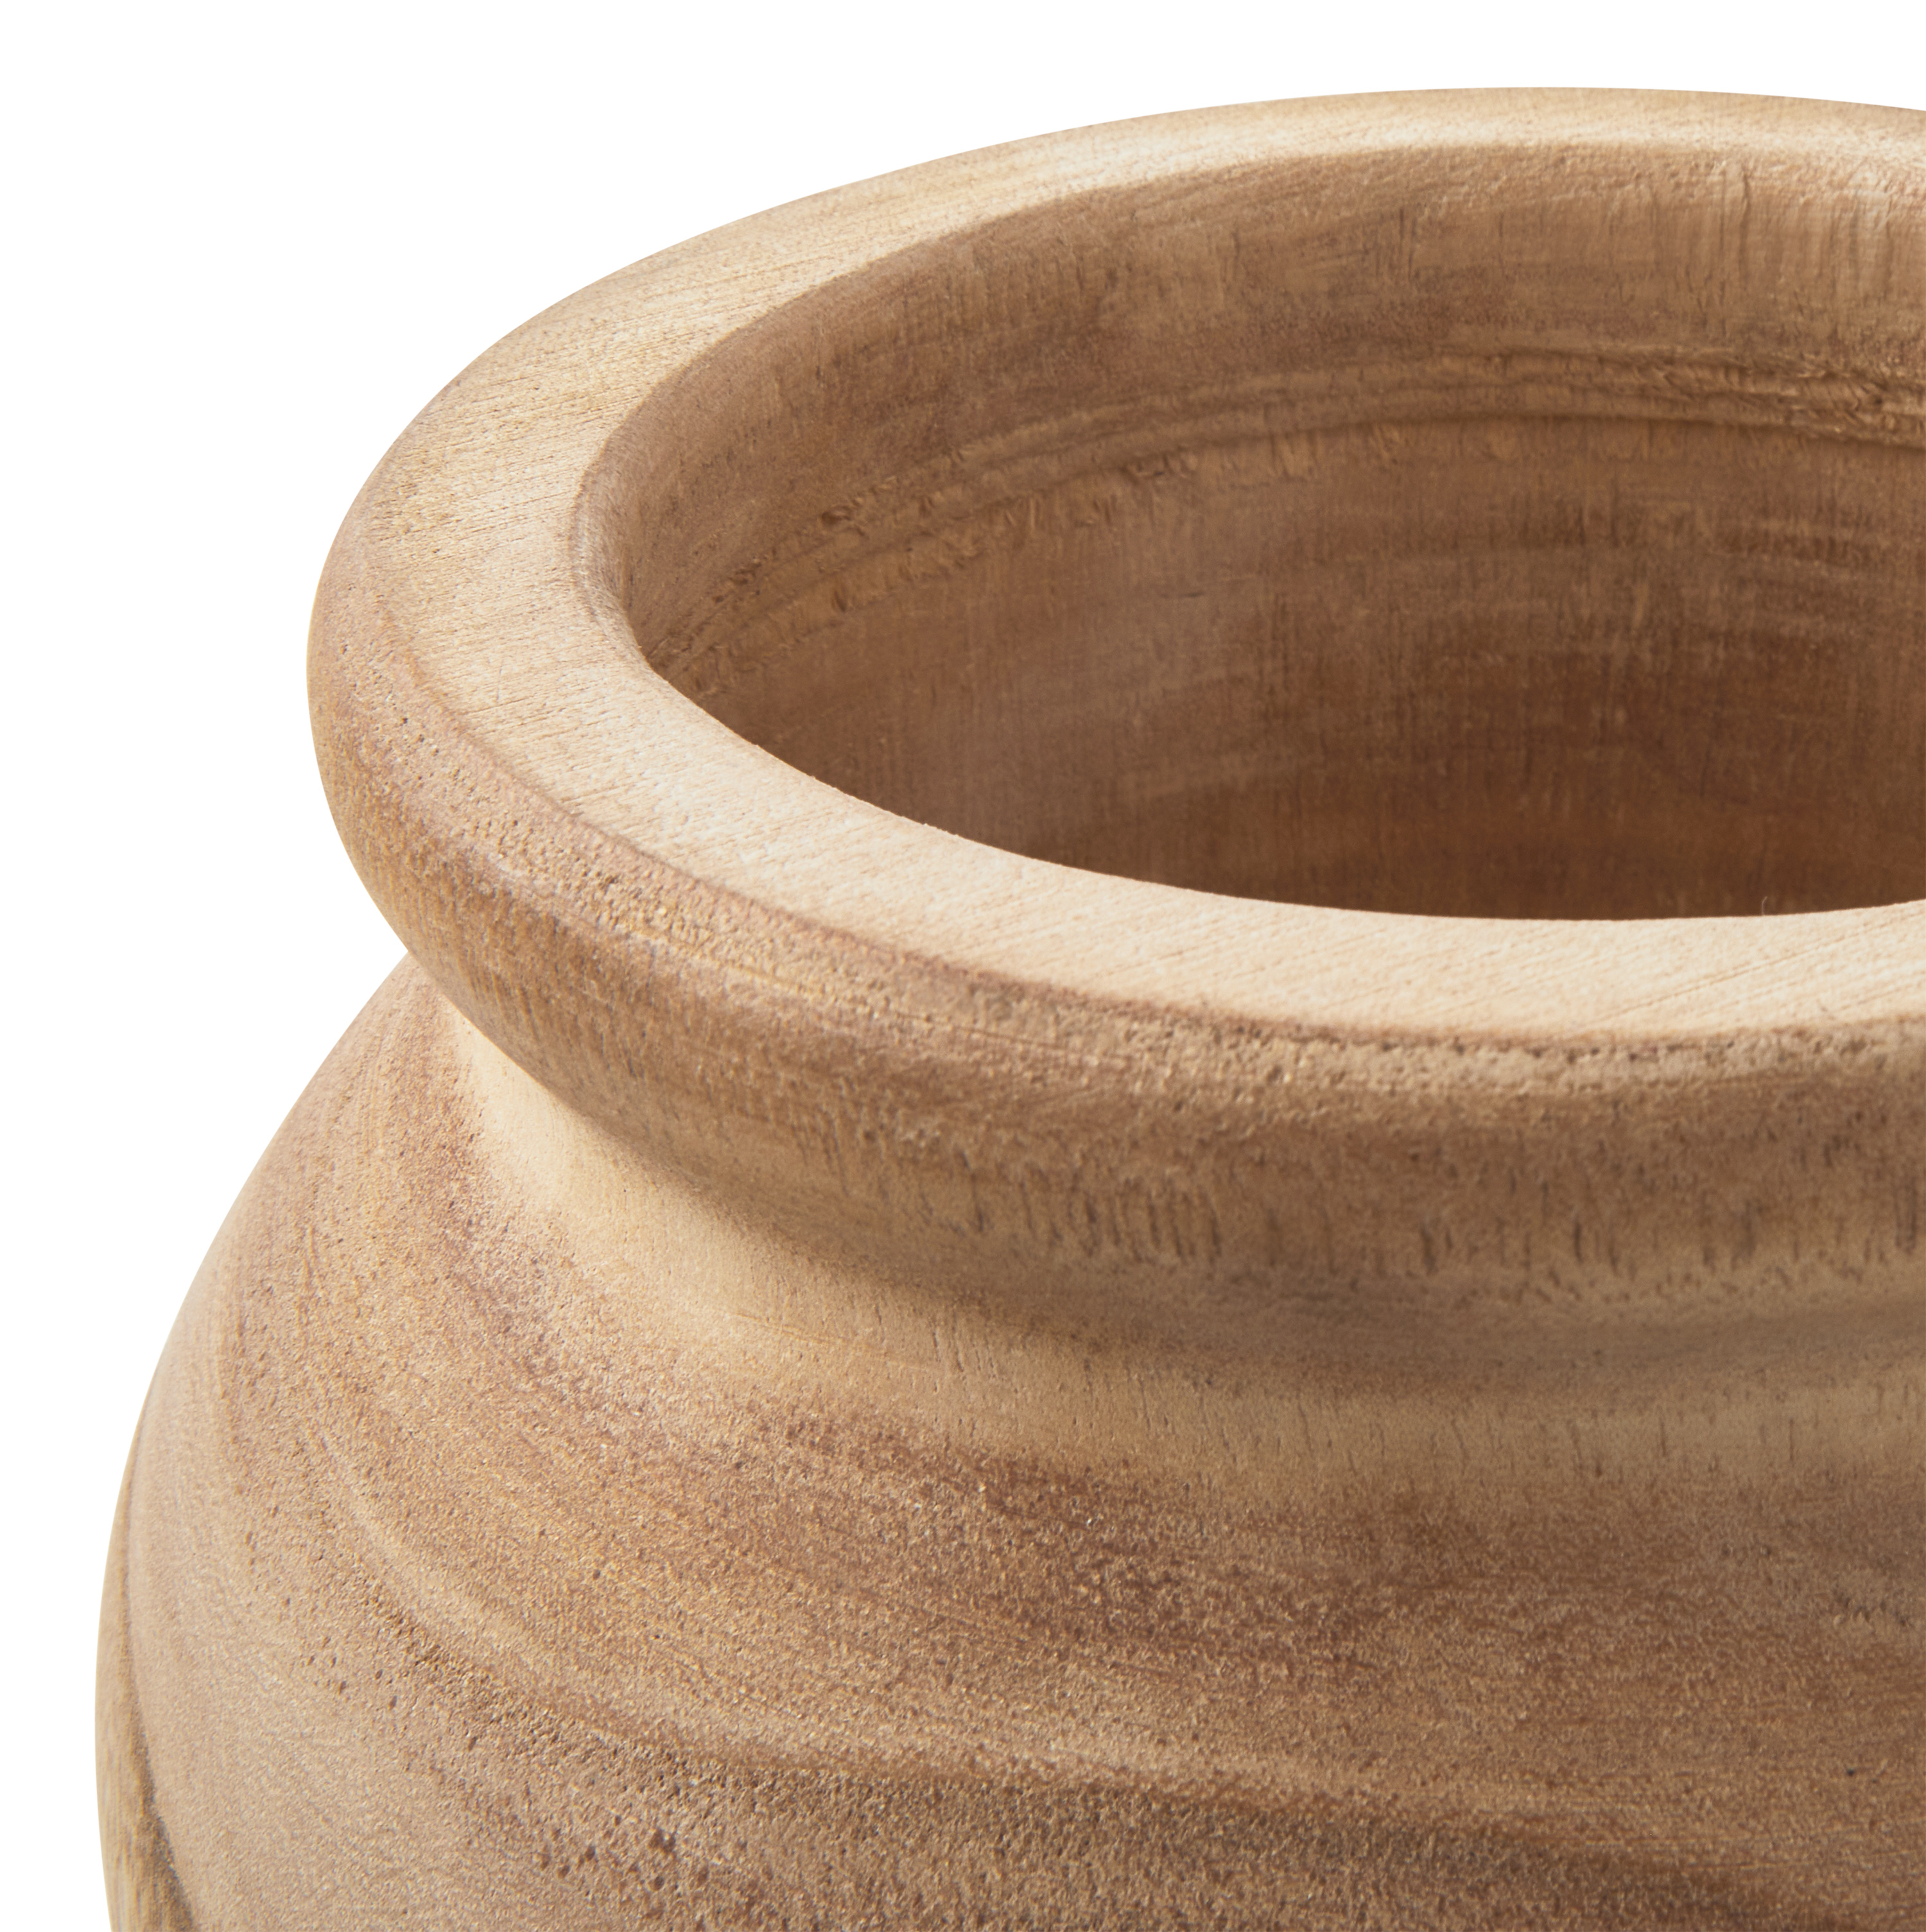 Better Homes & Gardens 7" Natural Wood Vase by Dave & Jenny Marrs - image 3 of 5